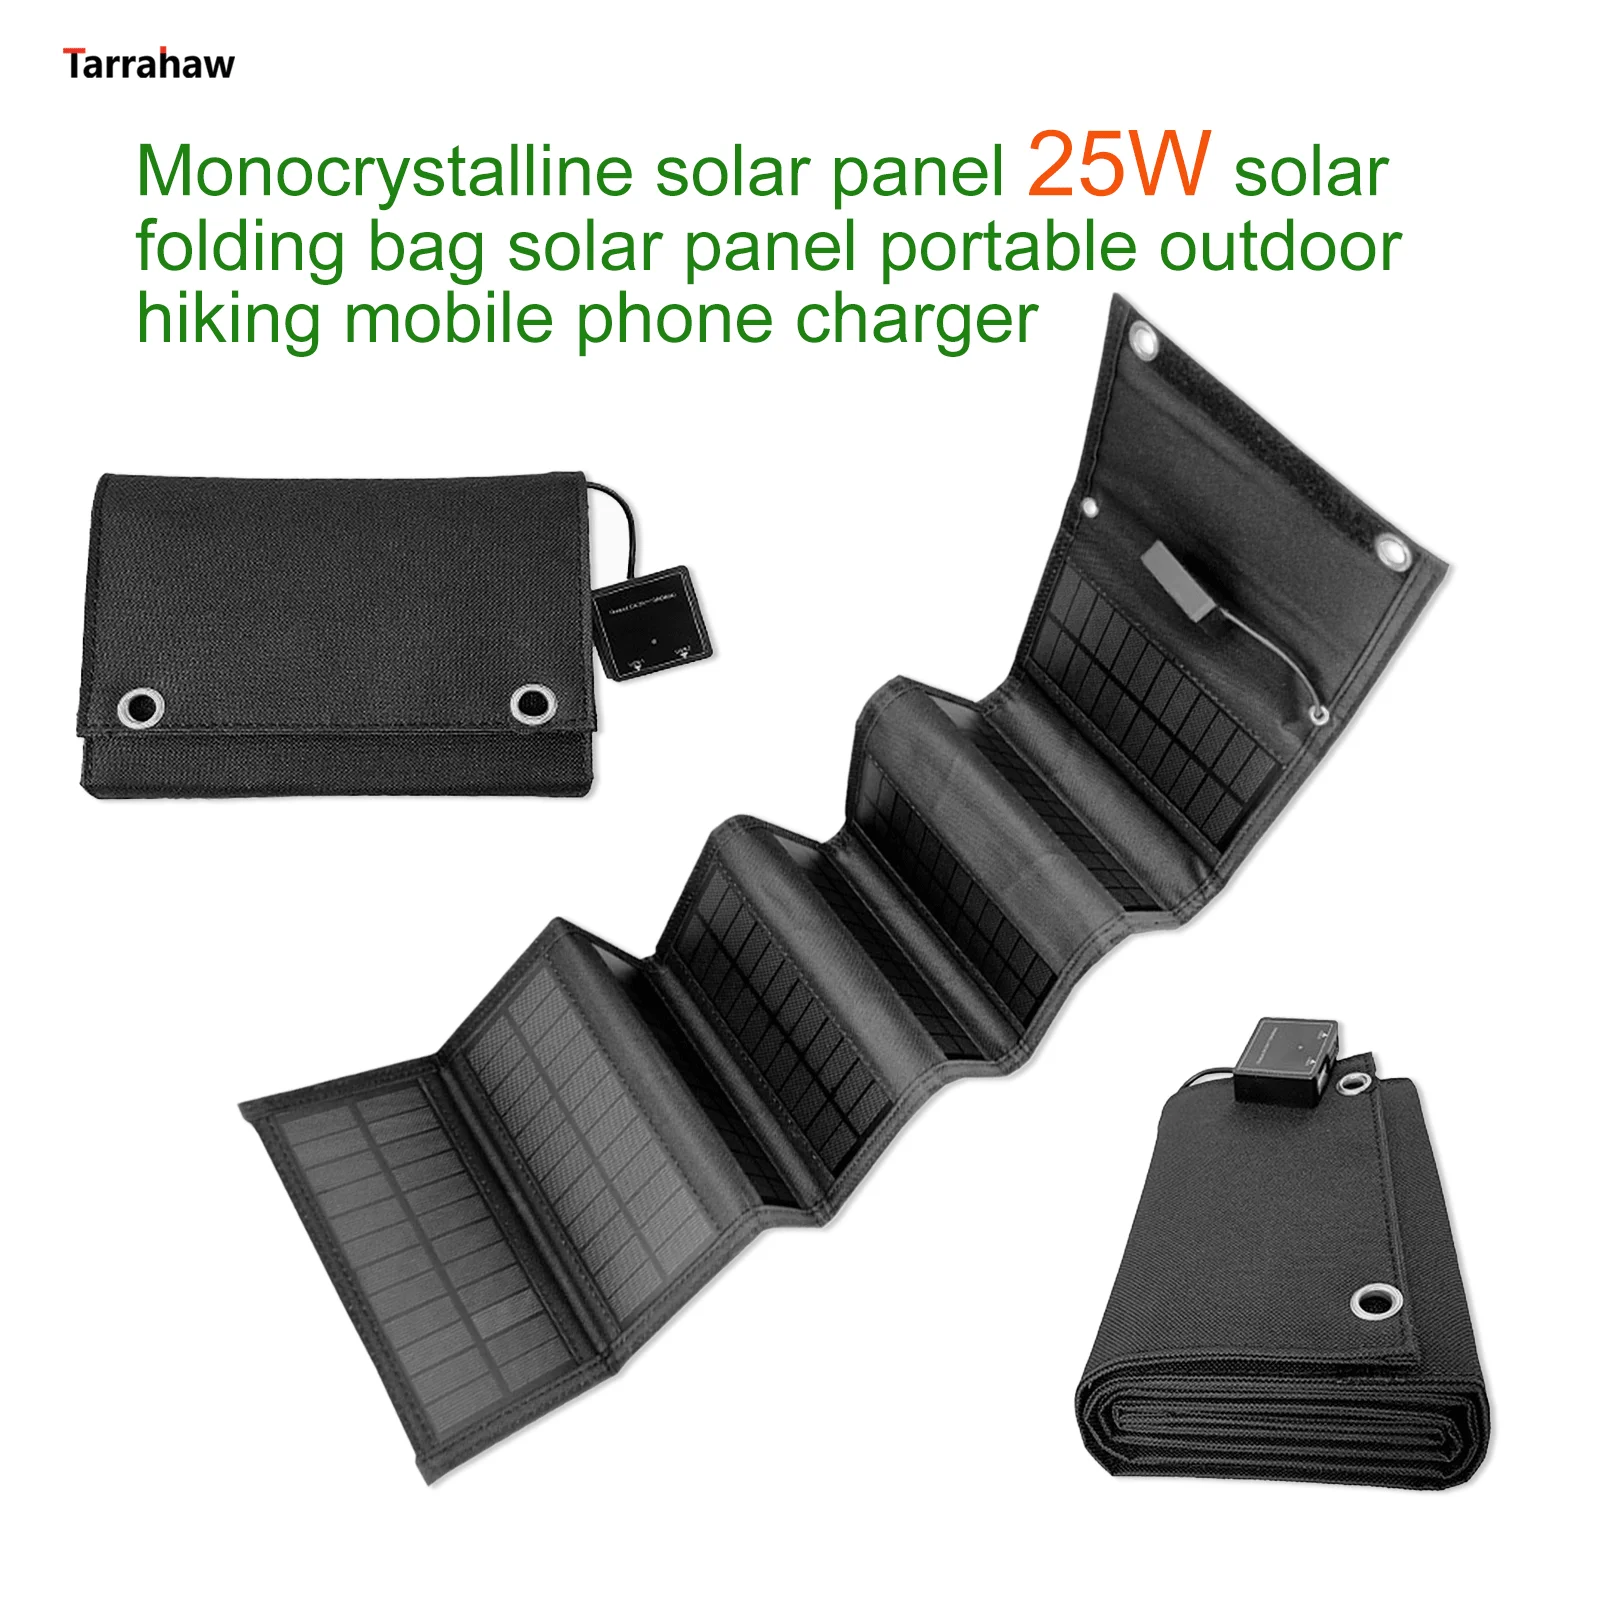 Monocrystalline Foldable Solar Panel 25W Portable PV Cell Folding Bag 2USB Output Outdoor Power Bank Hiking Mobile Phone Charger